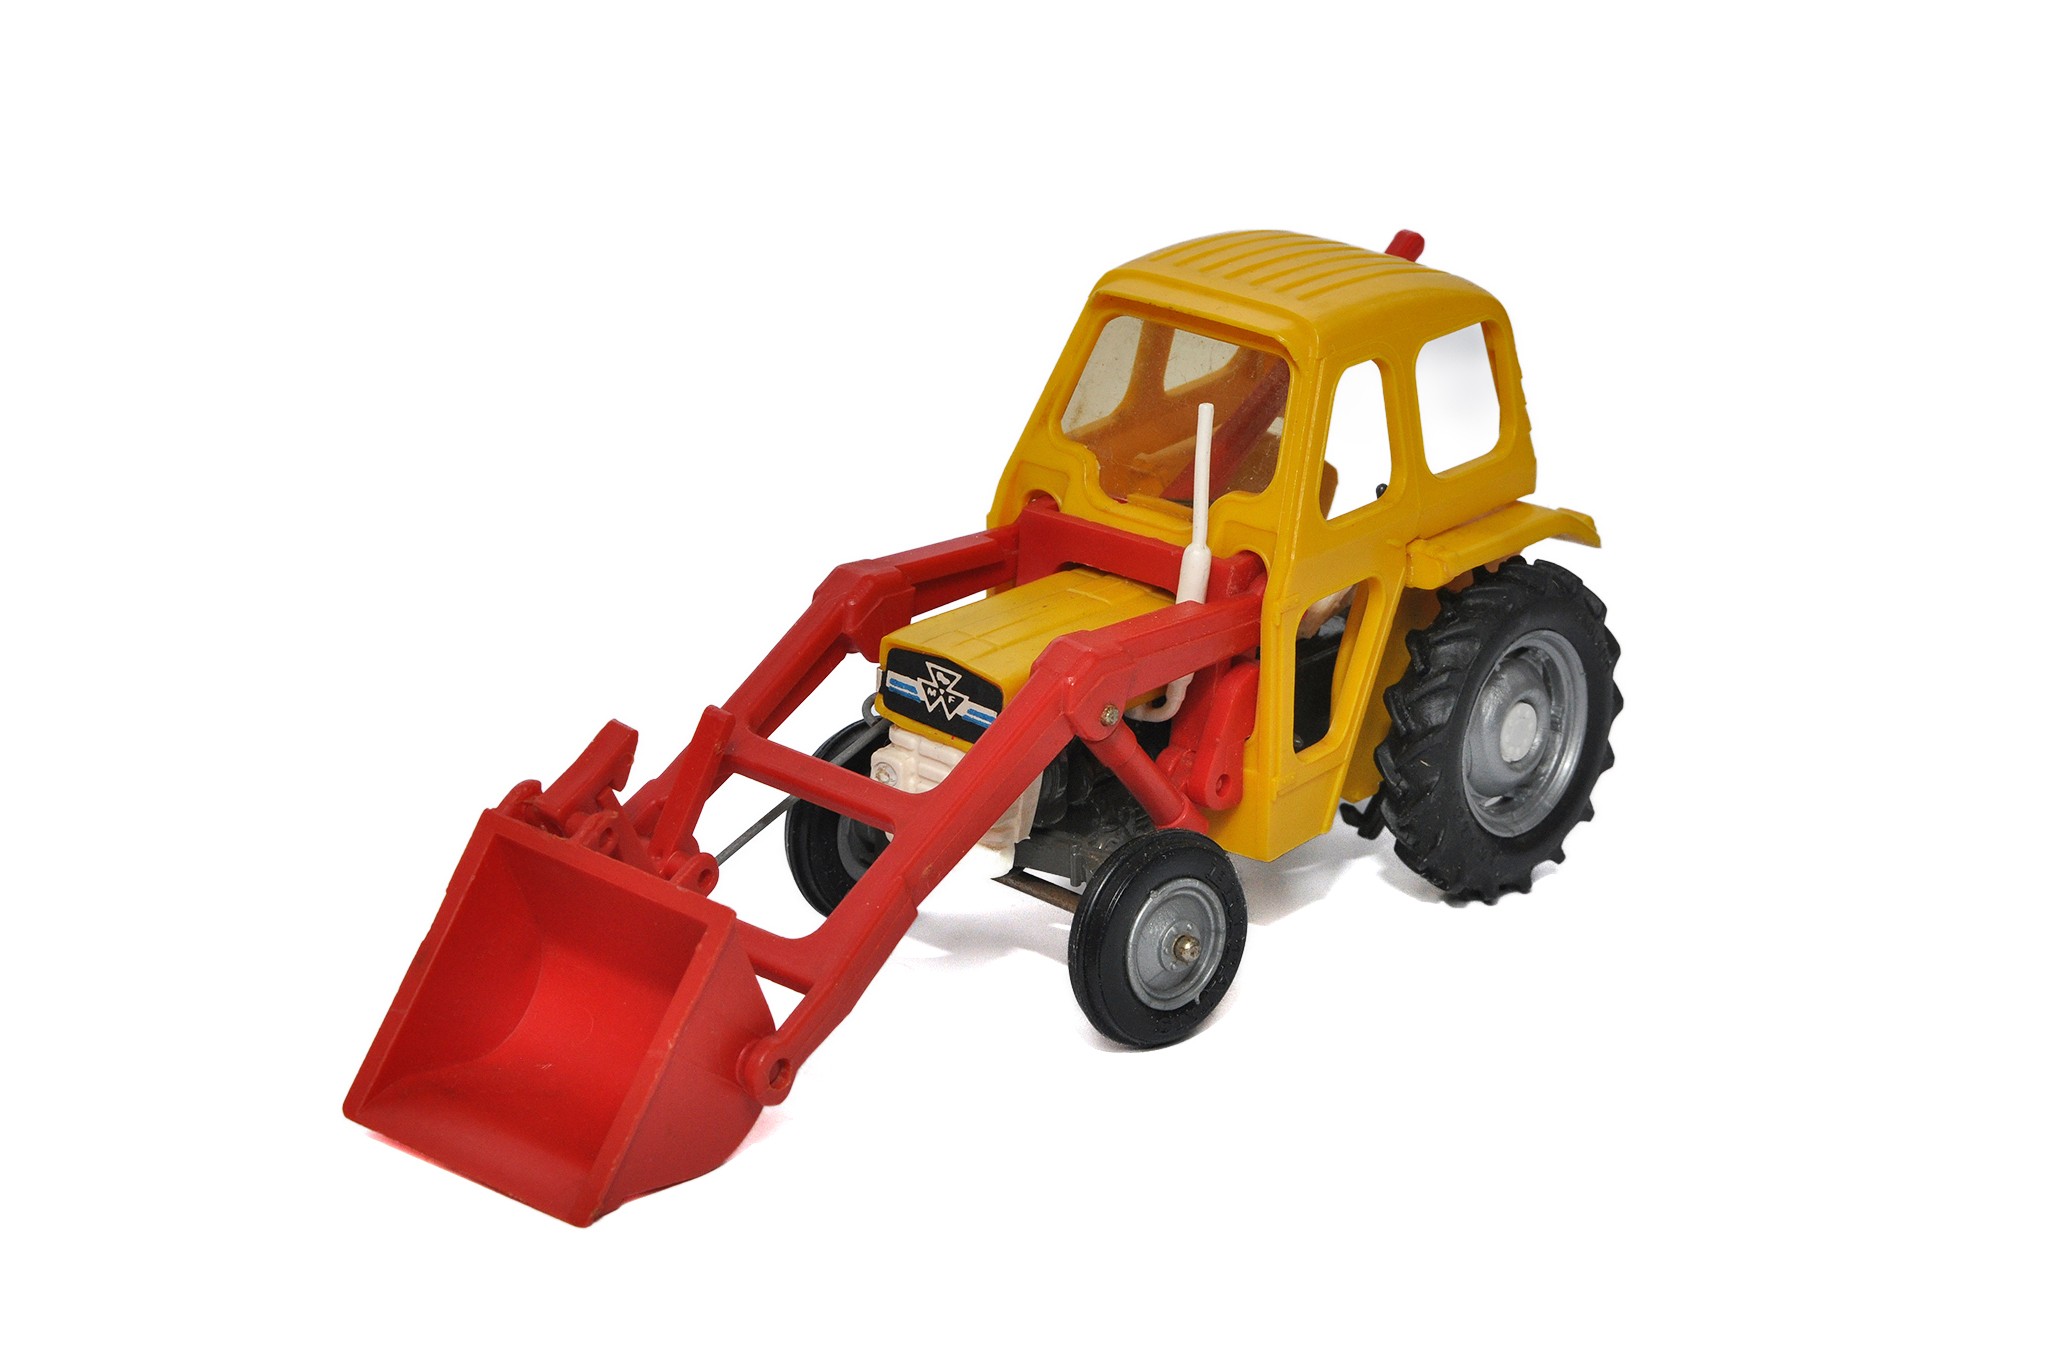 Britains 1/32 farm model issue comprising Massey Ferguson 135 Tractor with front loader. Looks to be